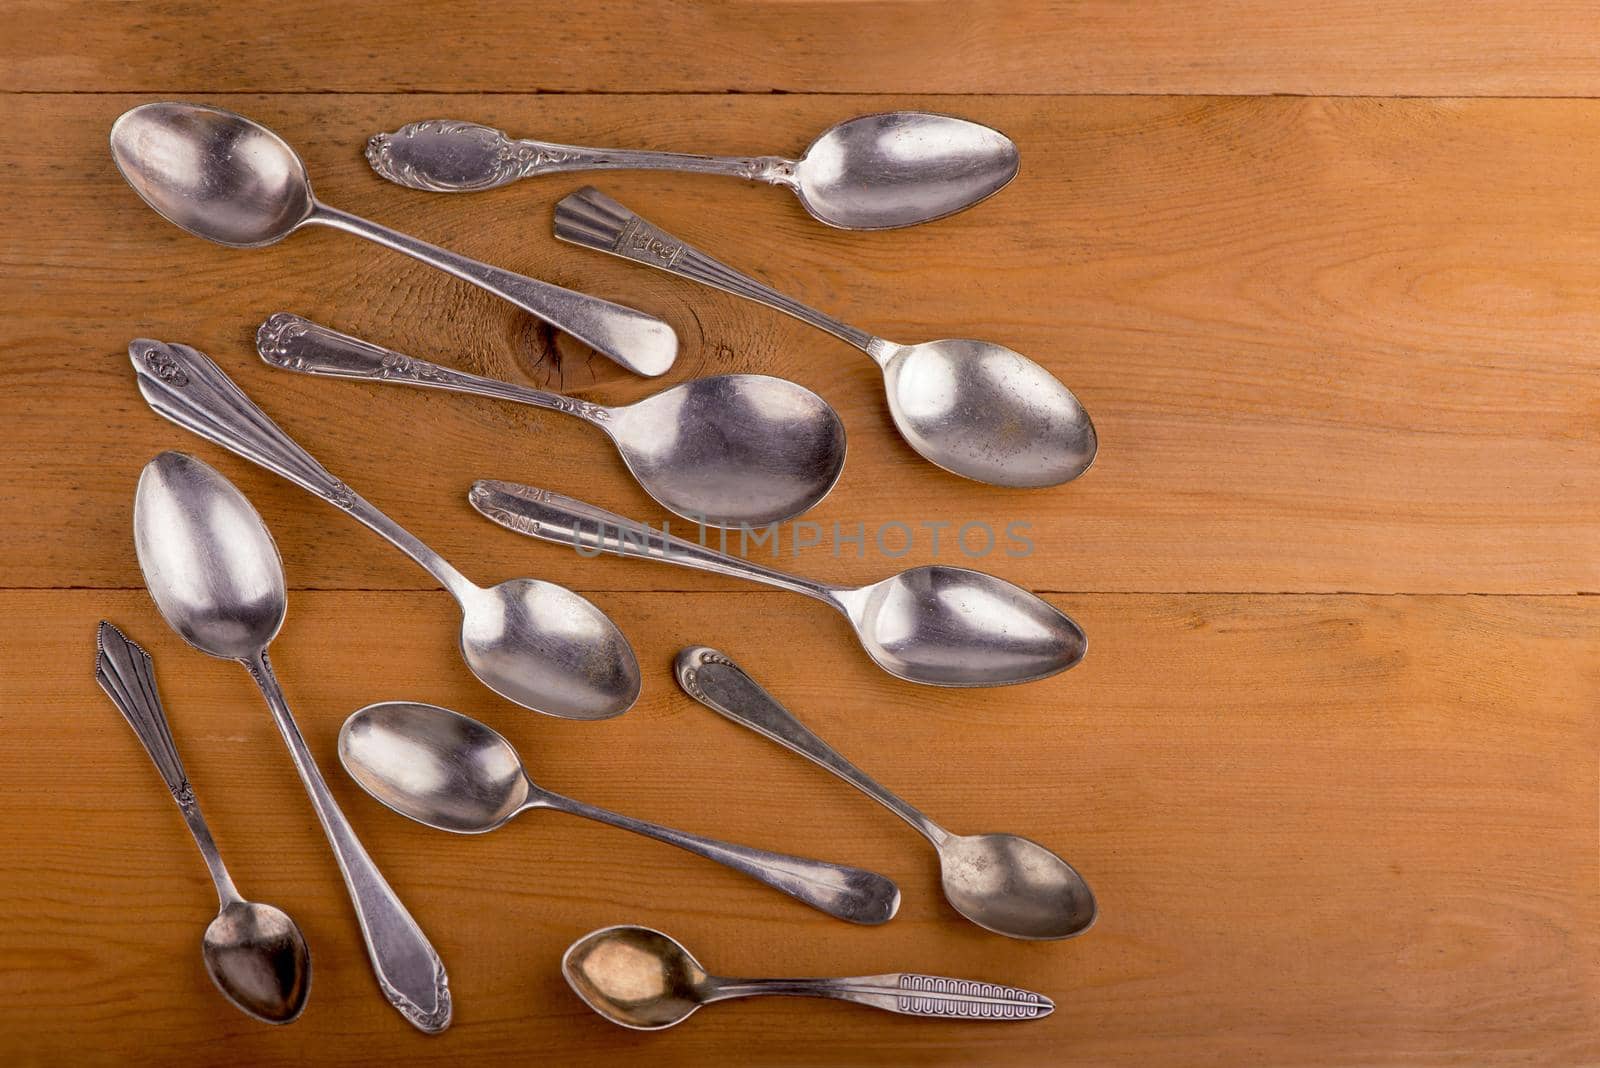 Vintage cutlery. different spoons on wooden background. Antique silverware. Retro. by aprilphoto